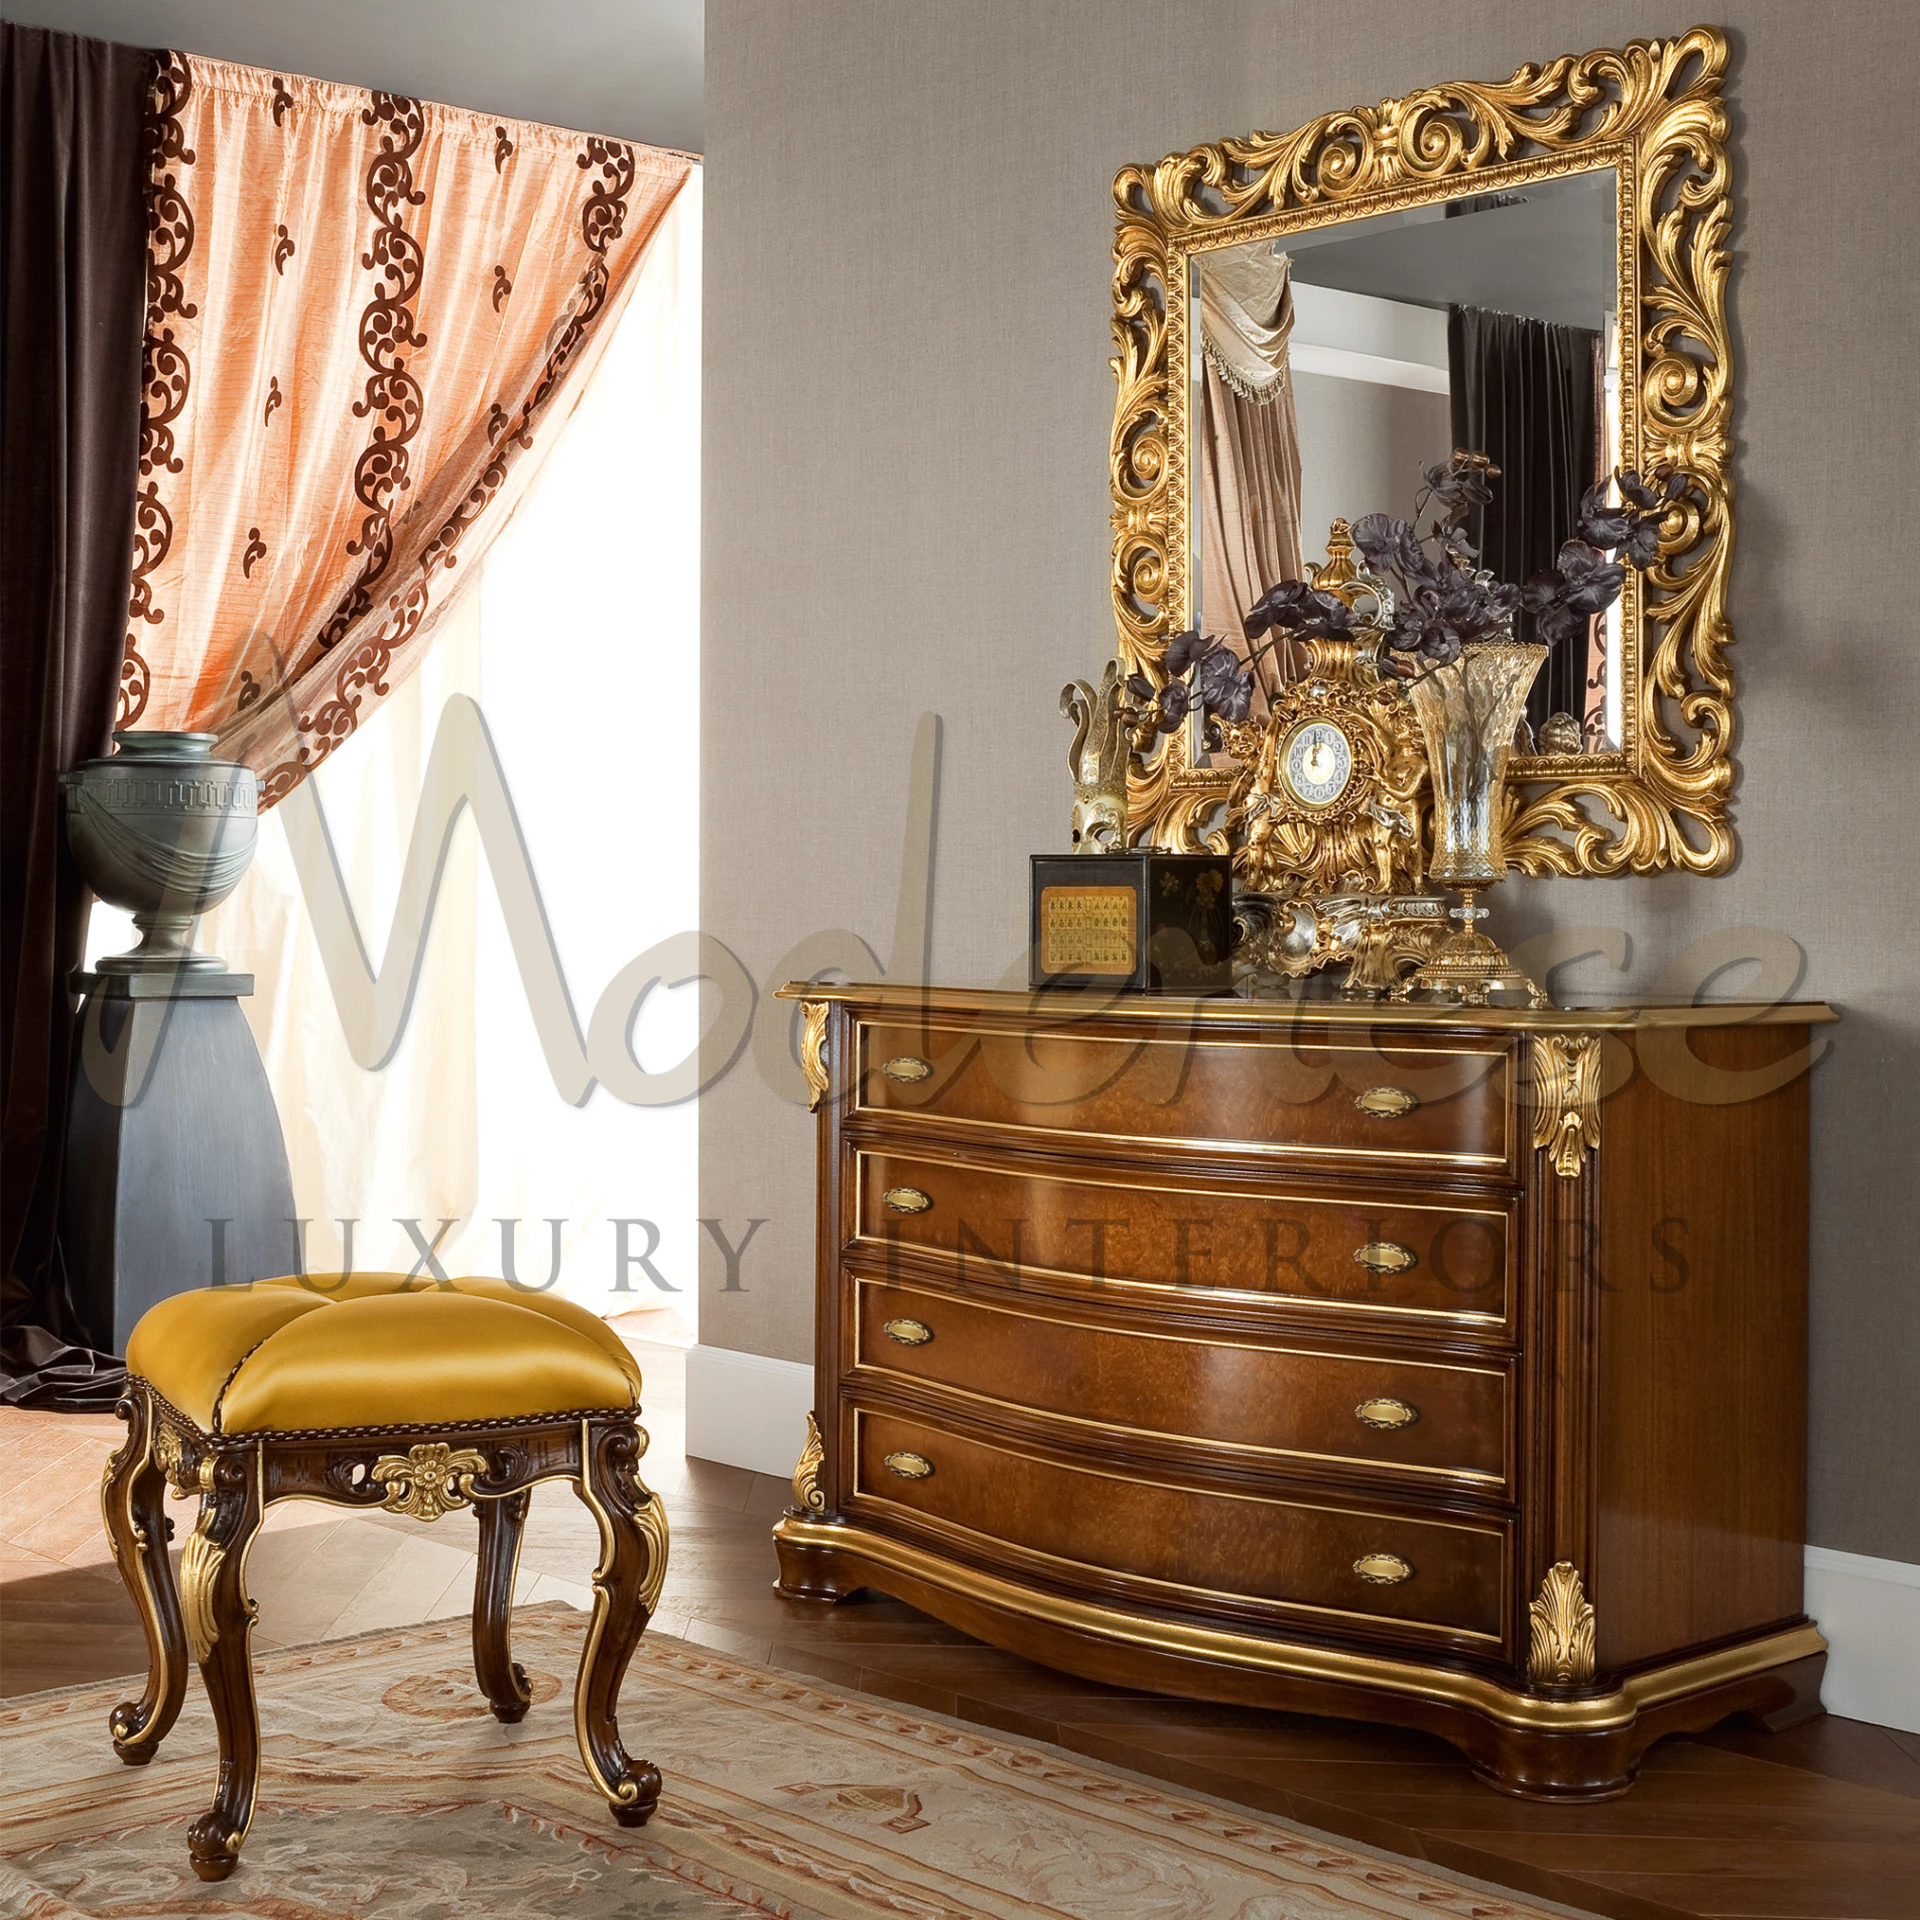 An luxurious bedroom setting featuring an ornate chest of drawers and mirror.